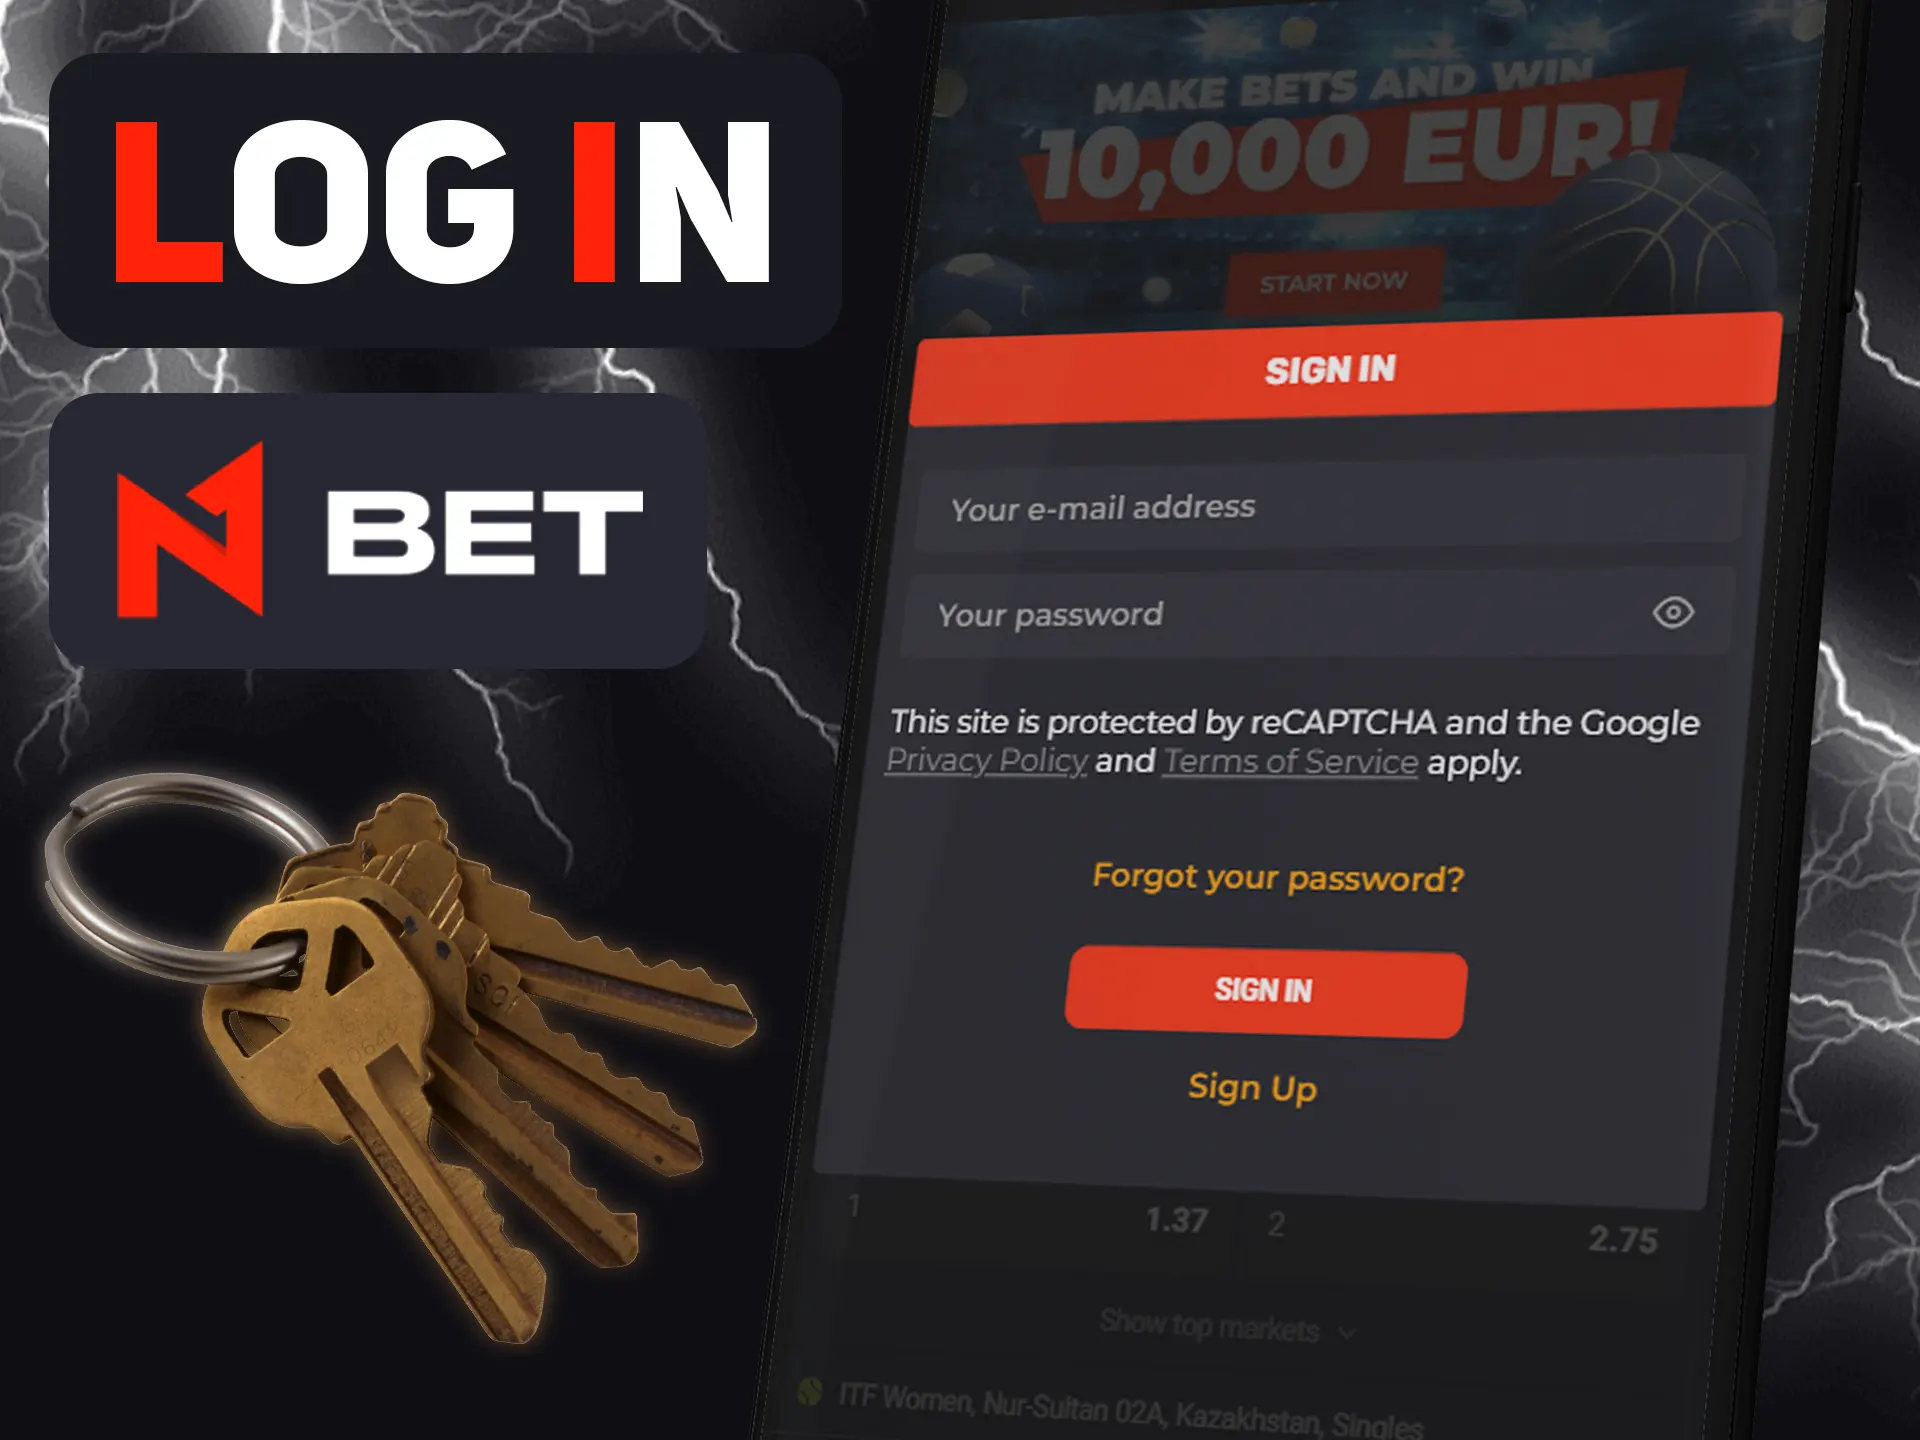 Log in using your N1bet account.